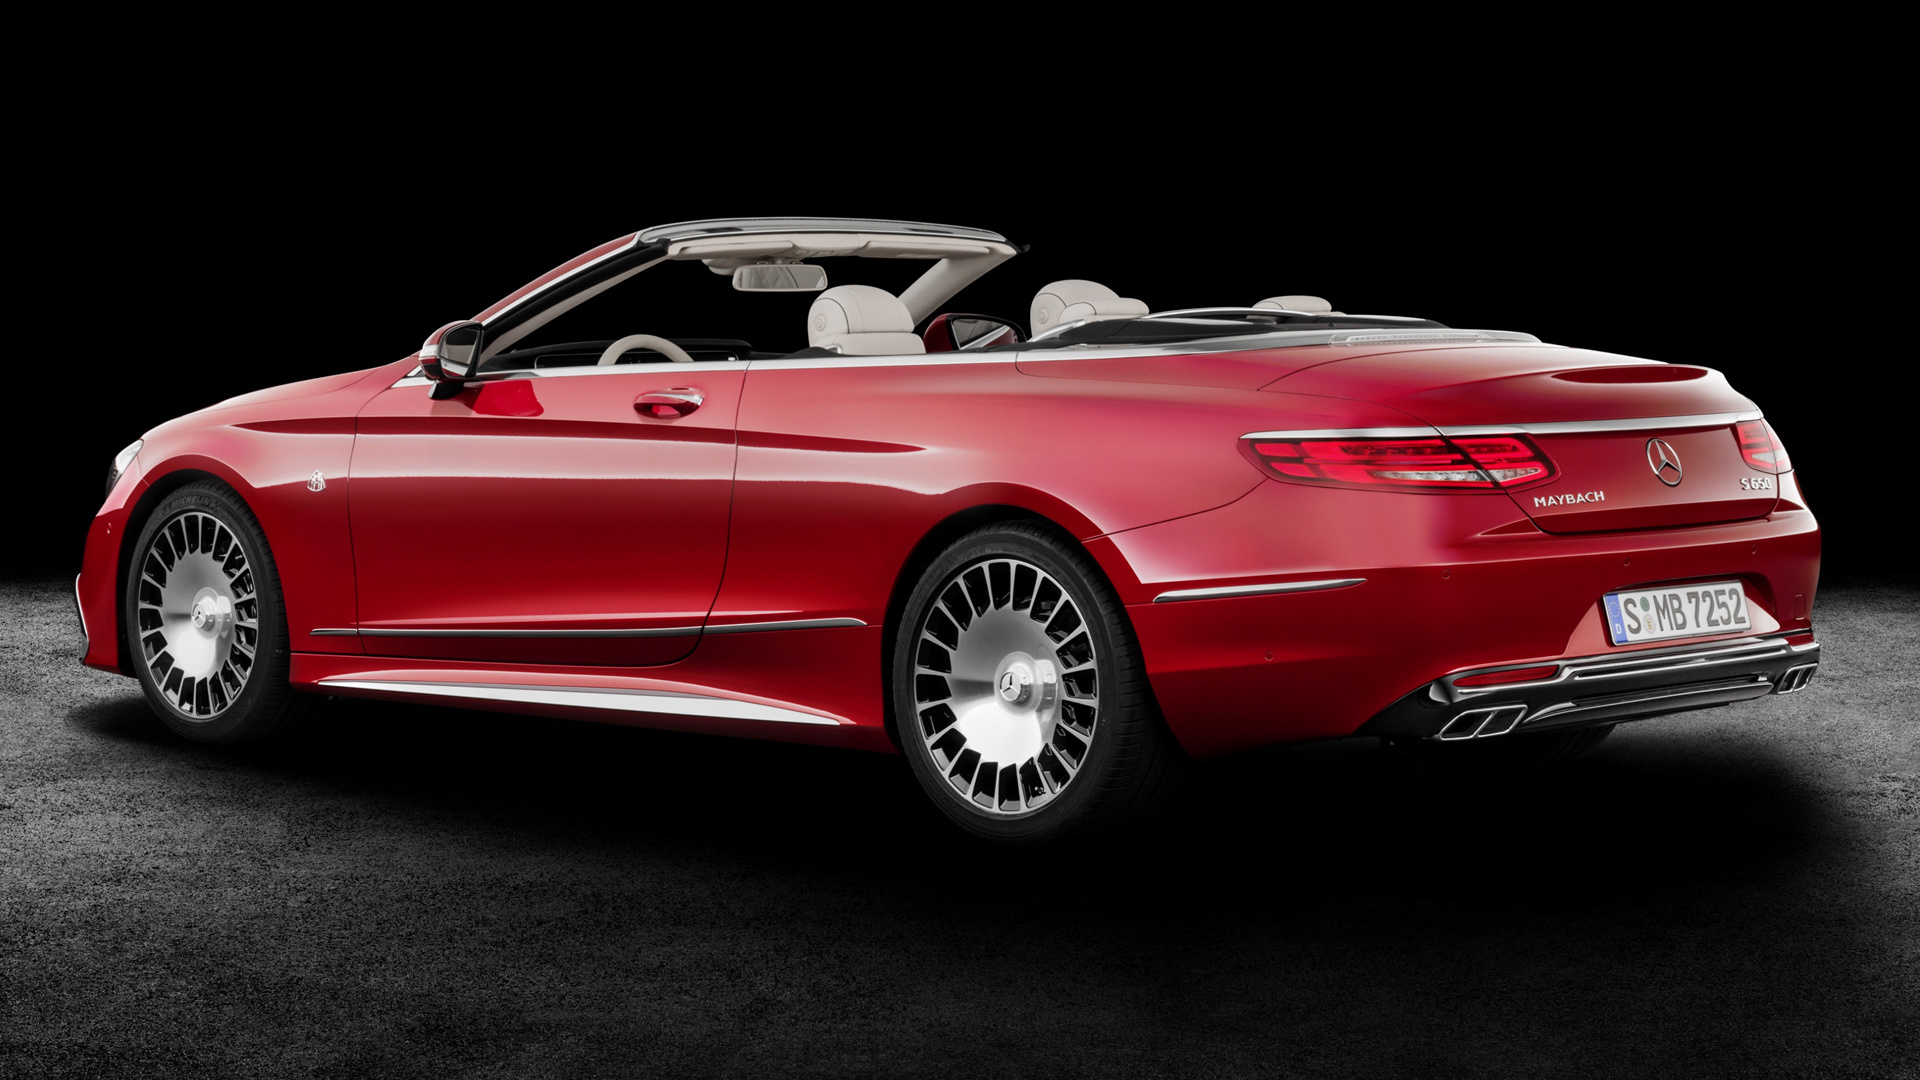 2017 MercedesMaybach SClass Cabriolet Wallpapers and